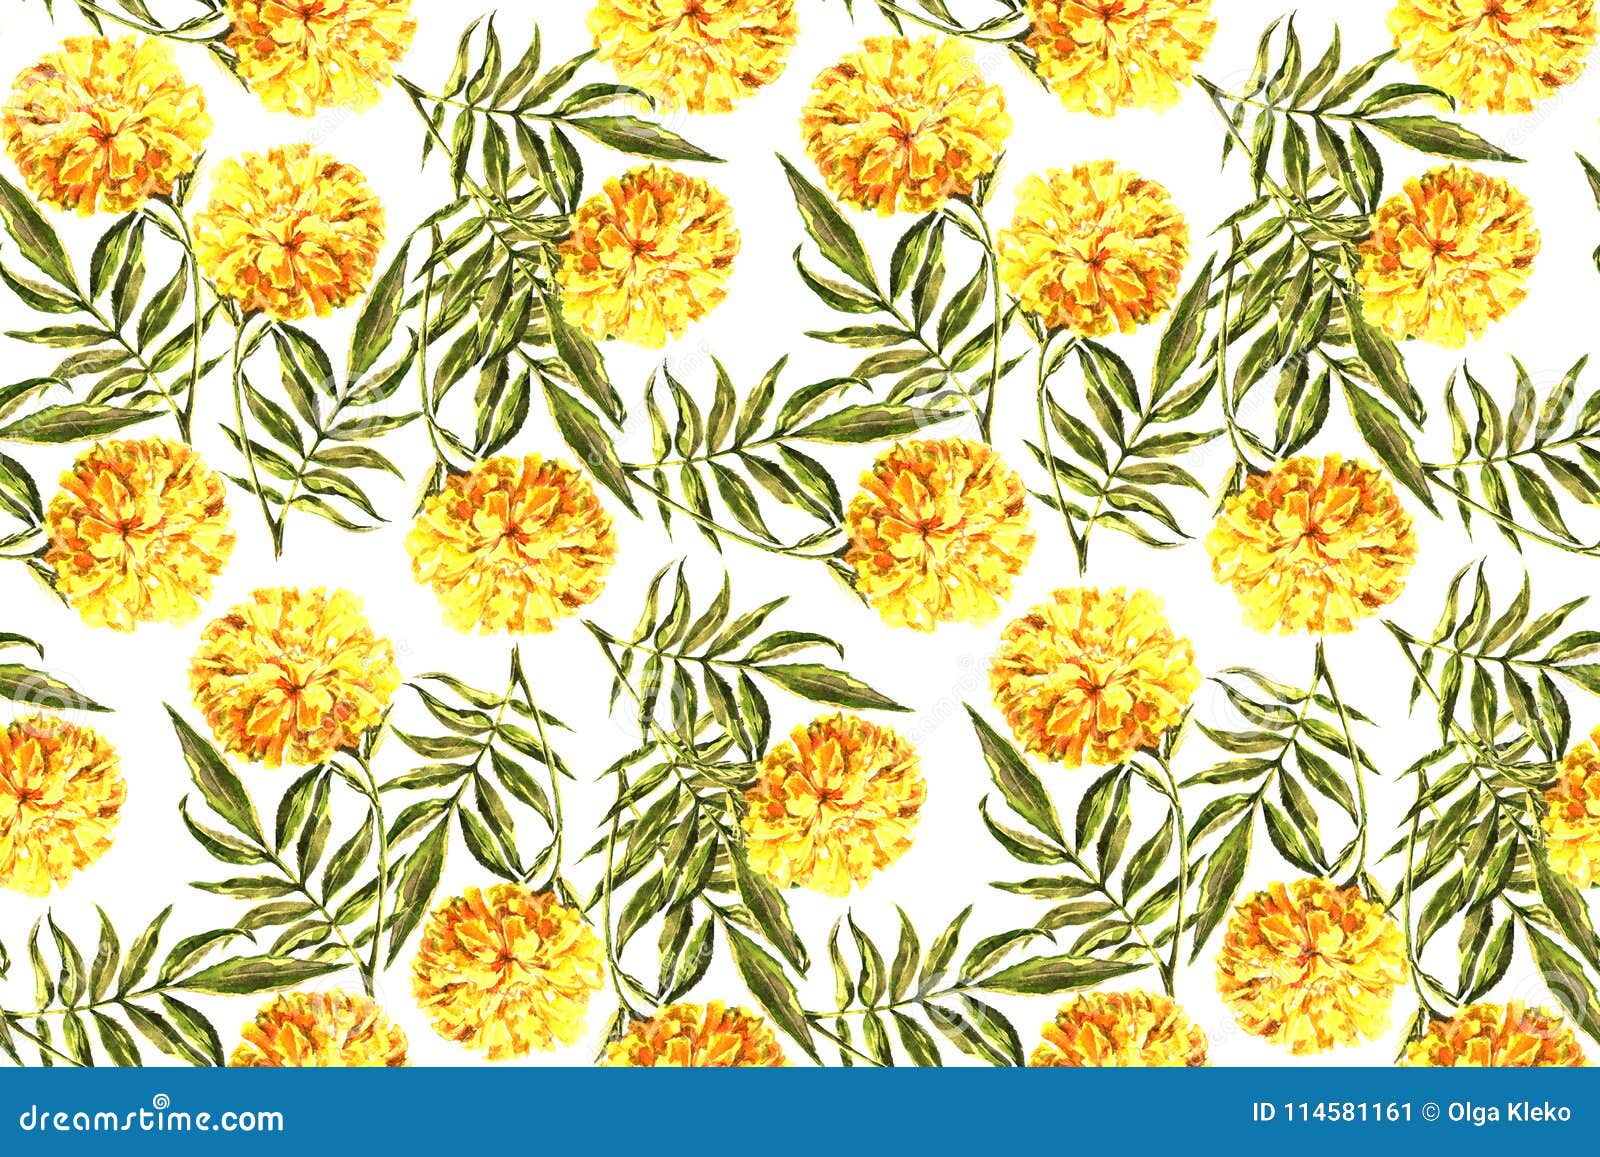 Watercolor Marigold with Leaf. Floral Seamless Pattern on a White Background.  Stock Illustration - Illustration of background, ethnic: 114581161